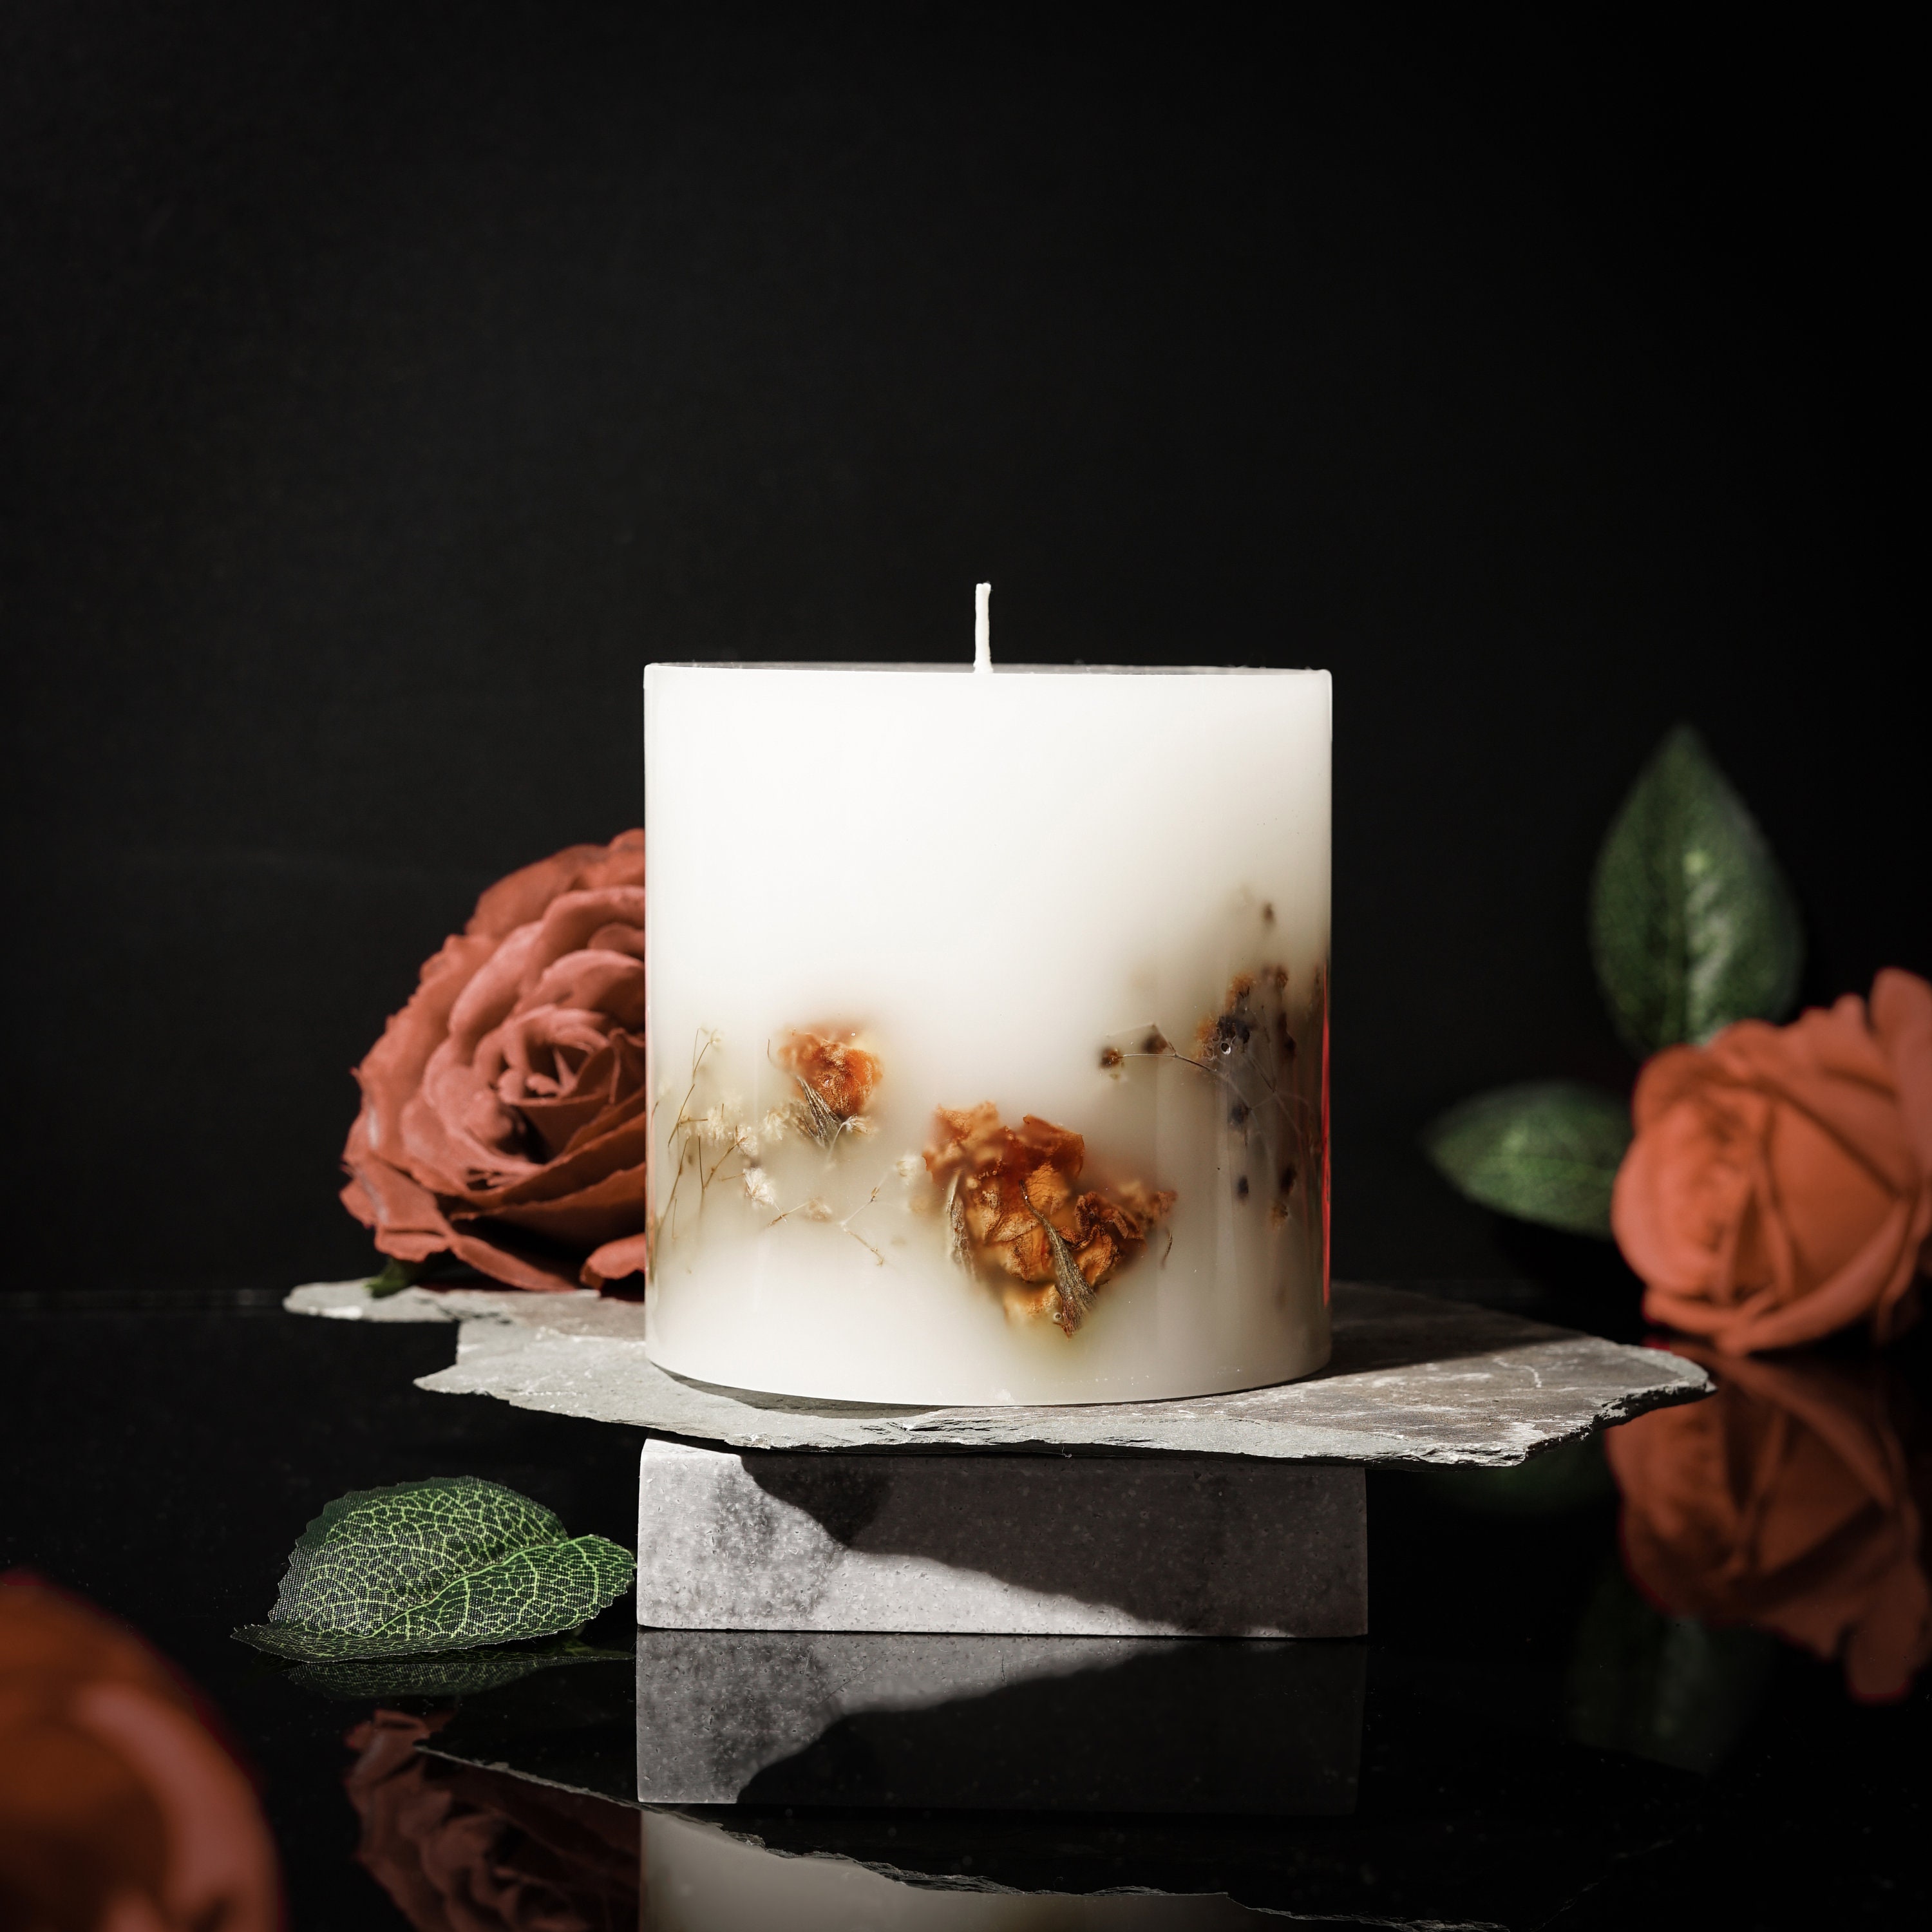 Candle wildflowers Breeze Floral Pillar Wax Candle Flowers Red Poppy and  Butterfly Gift Home Decoration Unique Hand Decorated 